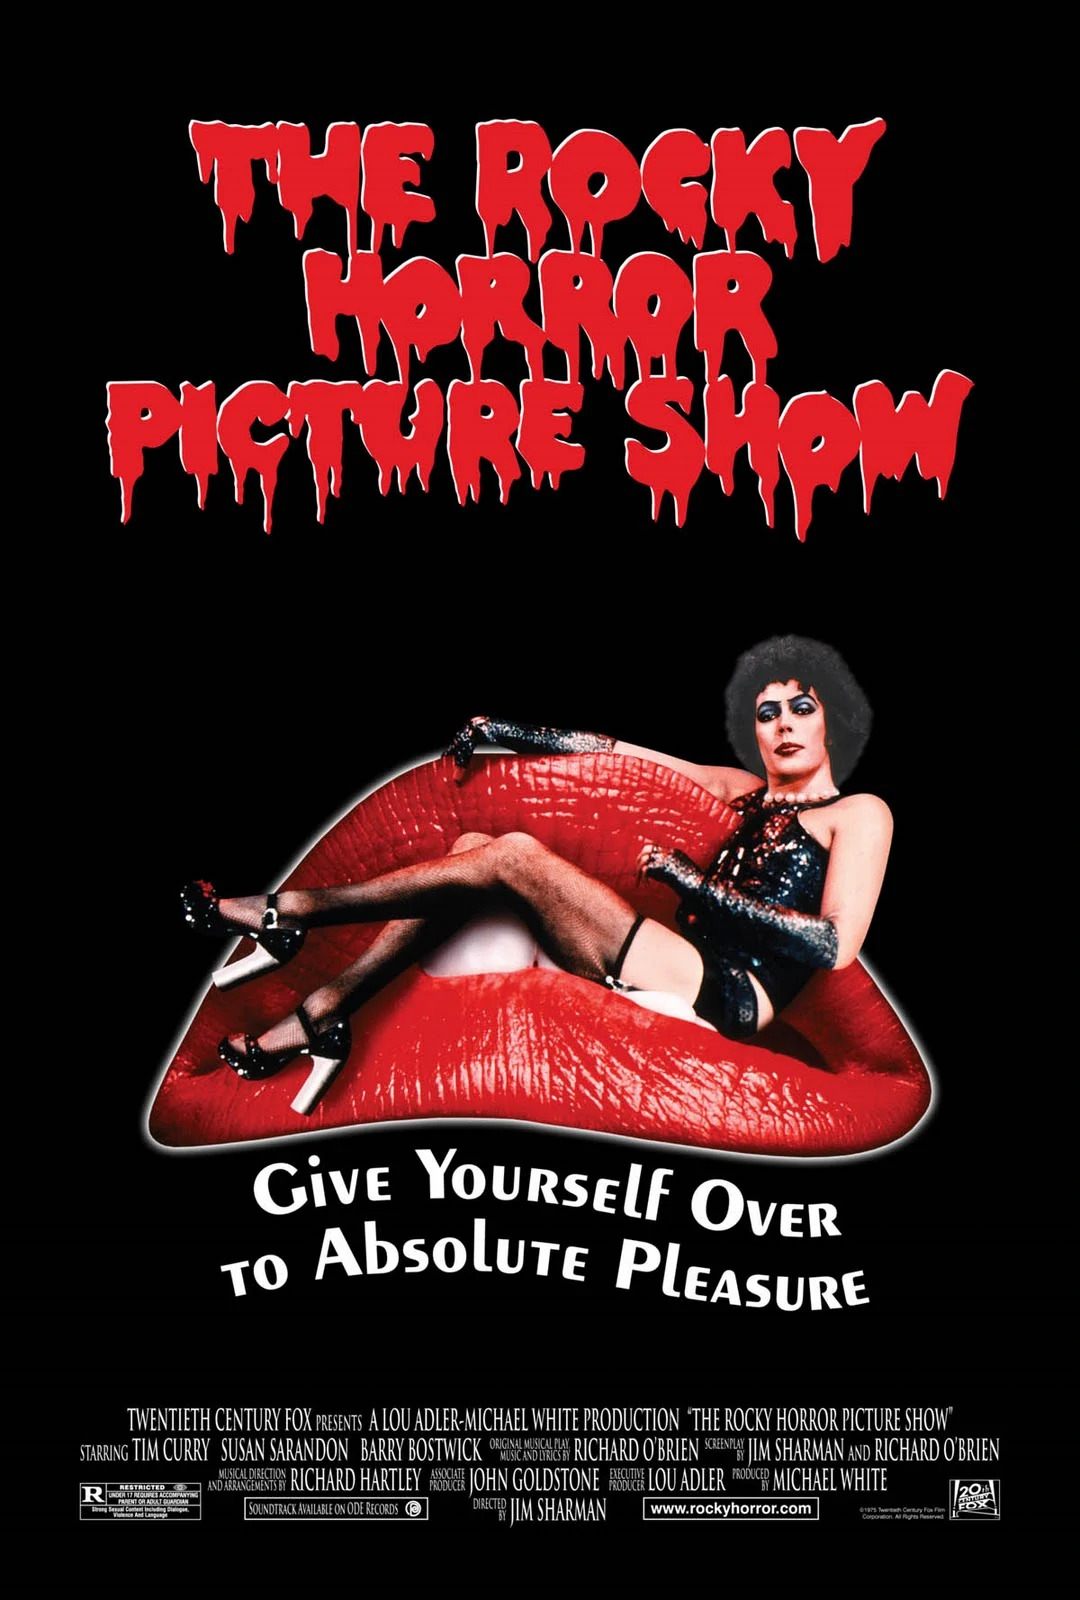 Film poster for THE ROCKY HORROR PICTURE SHOW (1975)